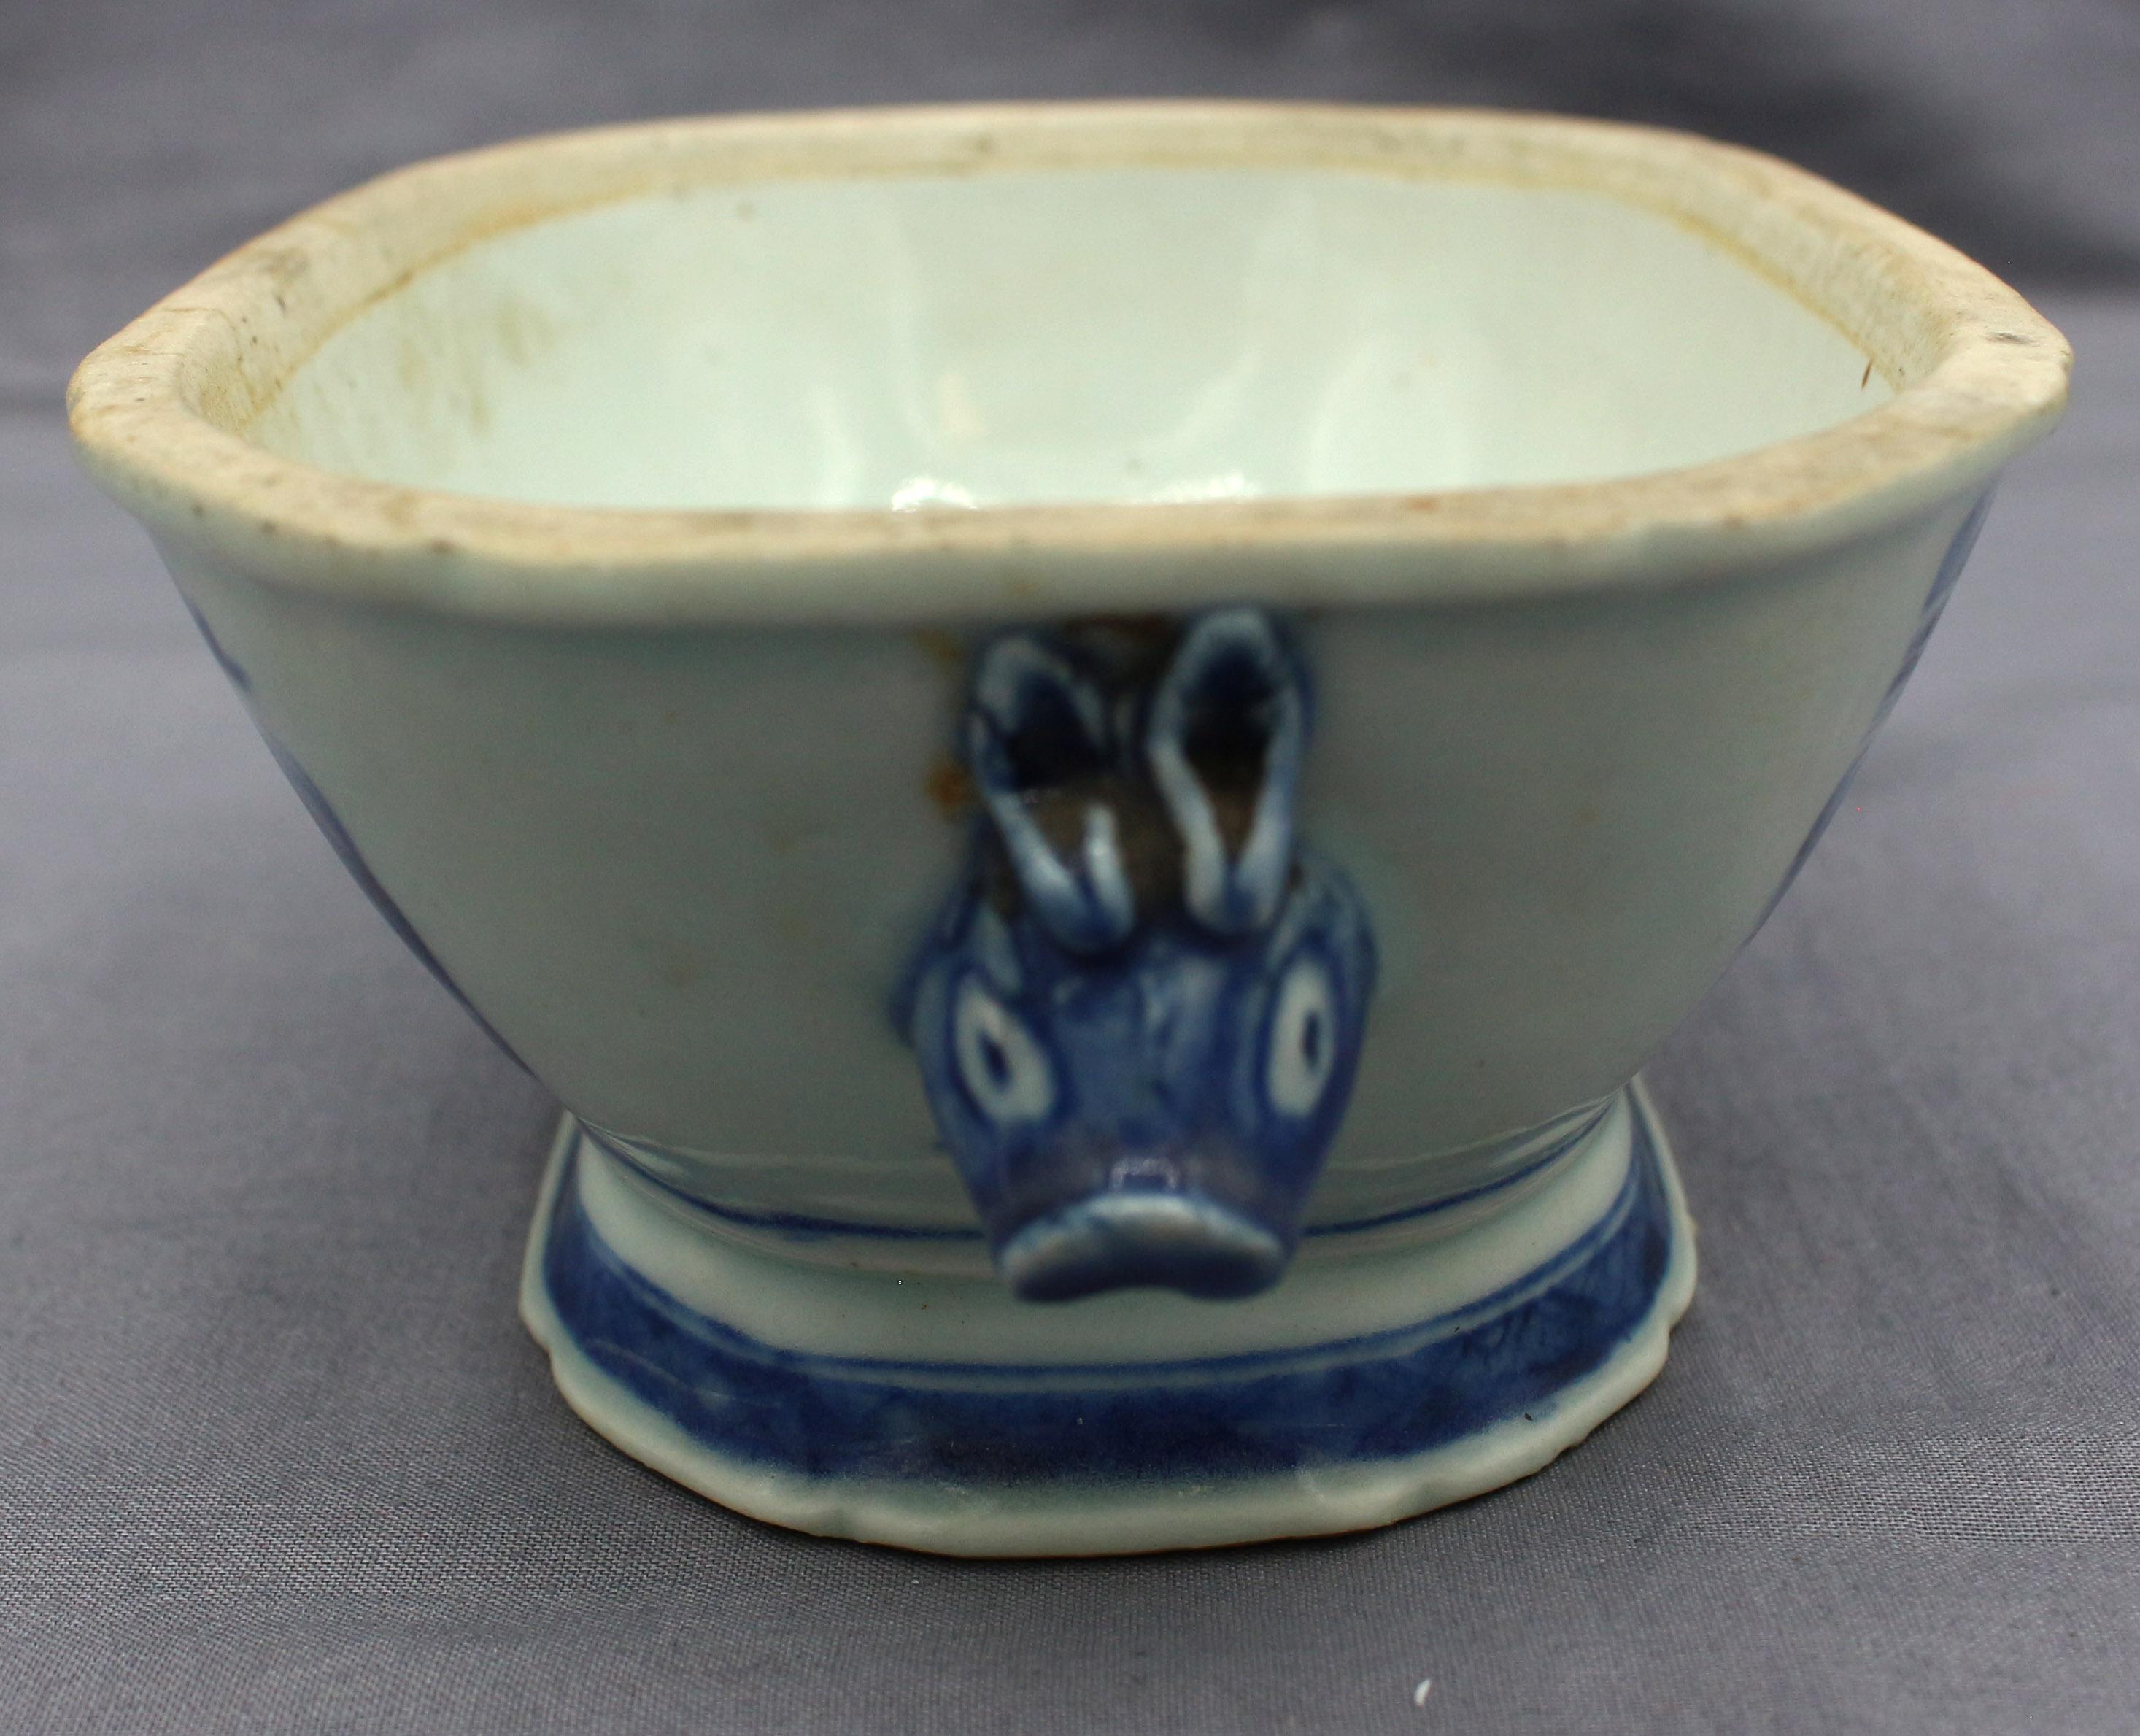 Ceramic Circa 1780-1800 Tureen with Associated Stand, Blue Canton, Chinese Export For Sale